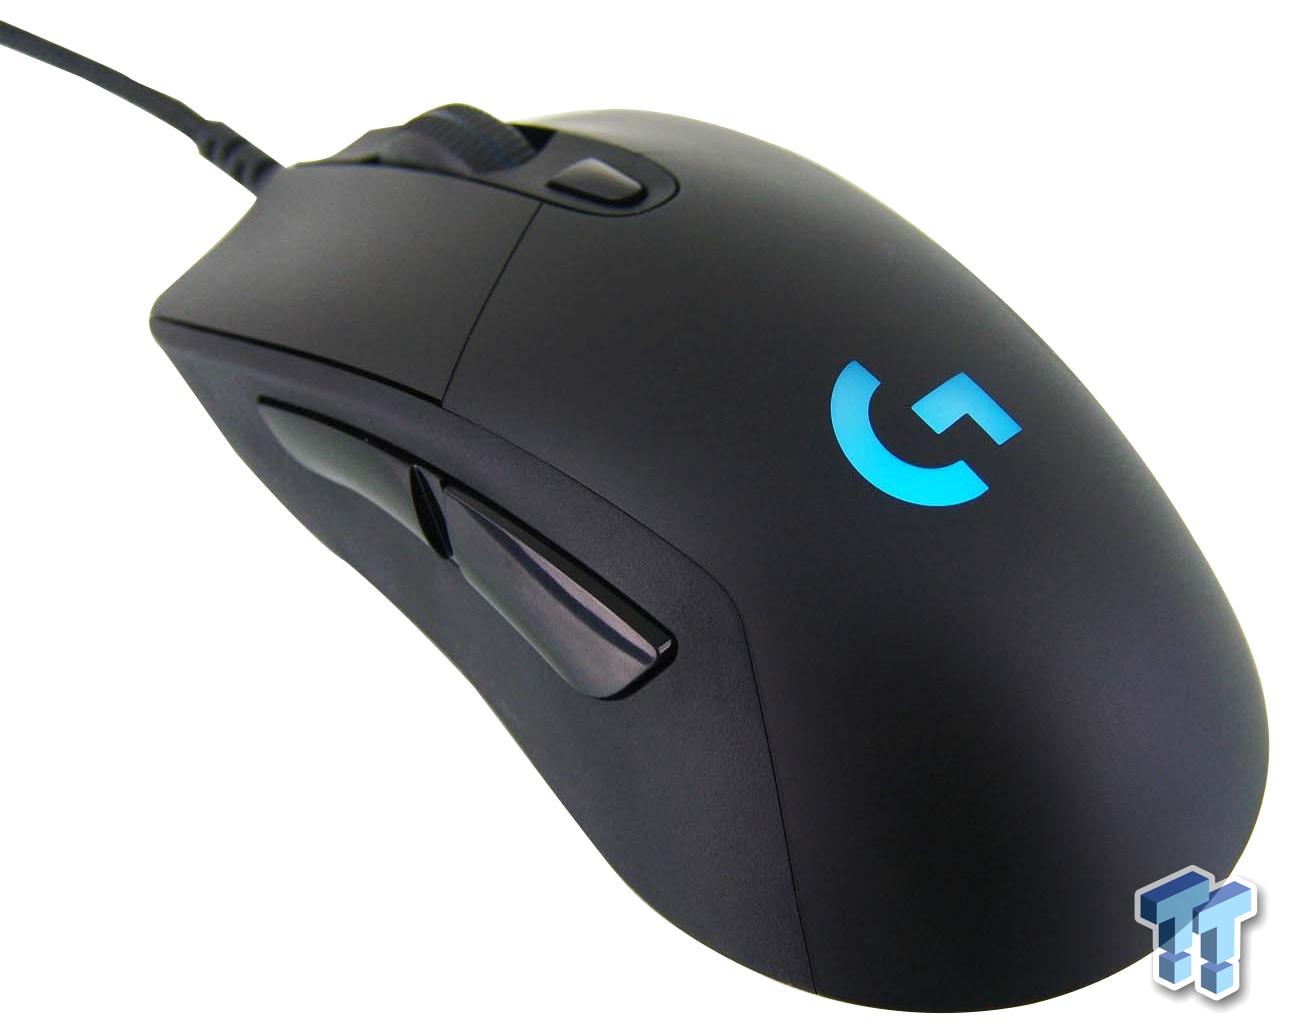 Prodigy Wireless/Wired Gaming Mouse Review